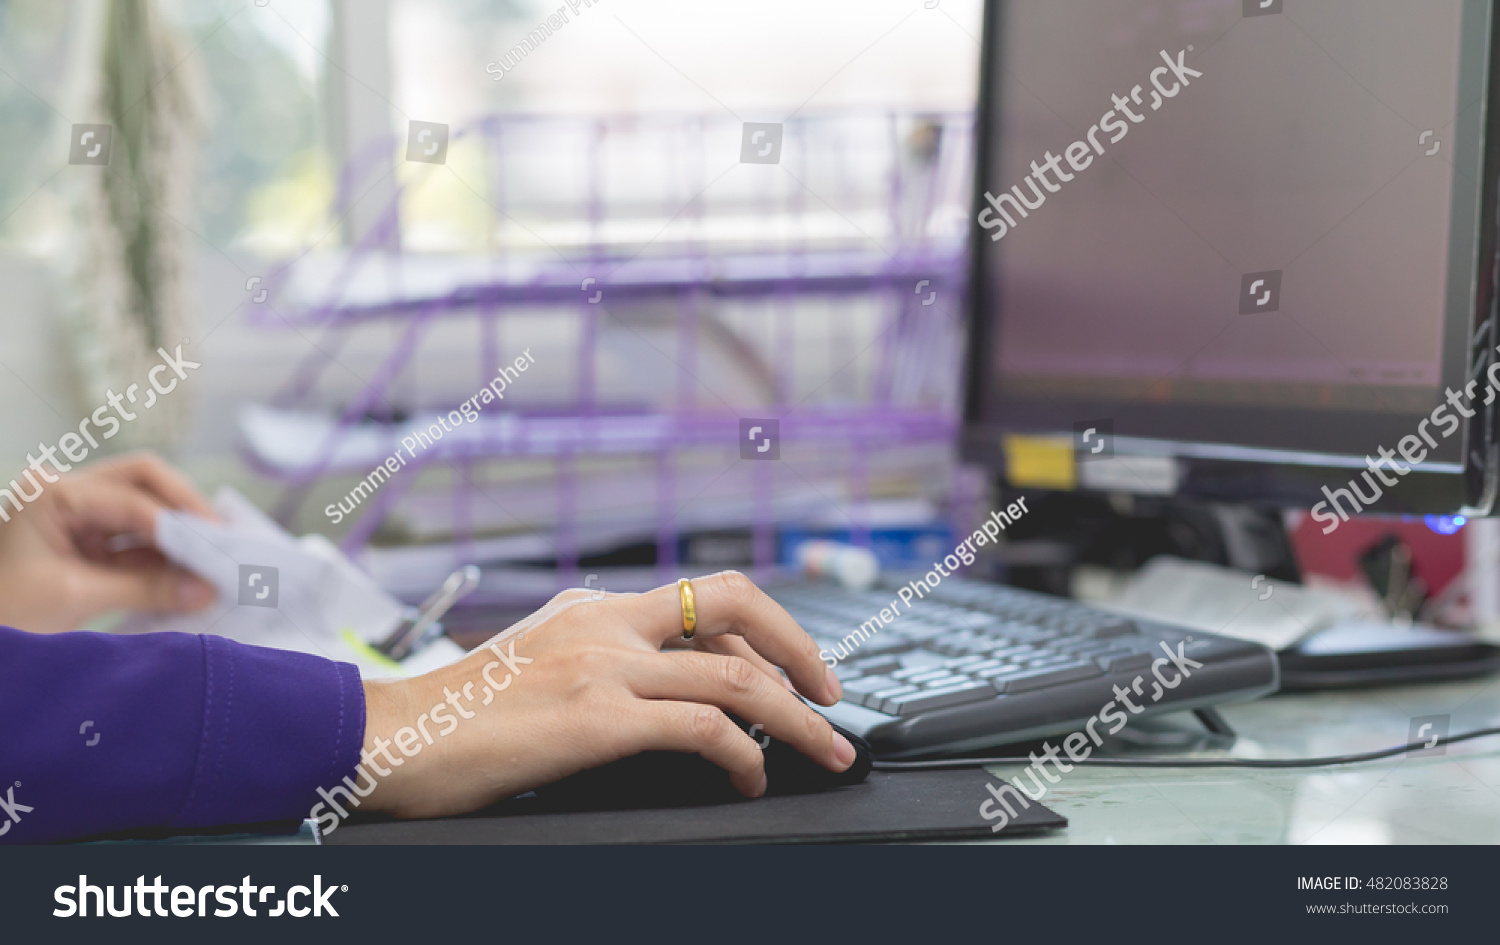 Woman's hand holding a mouse for office work #482083828